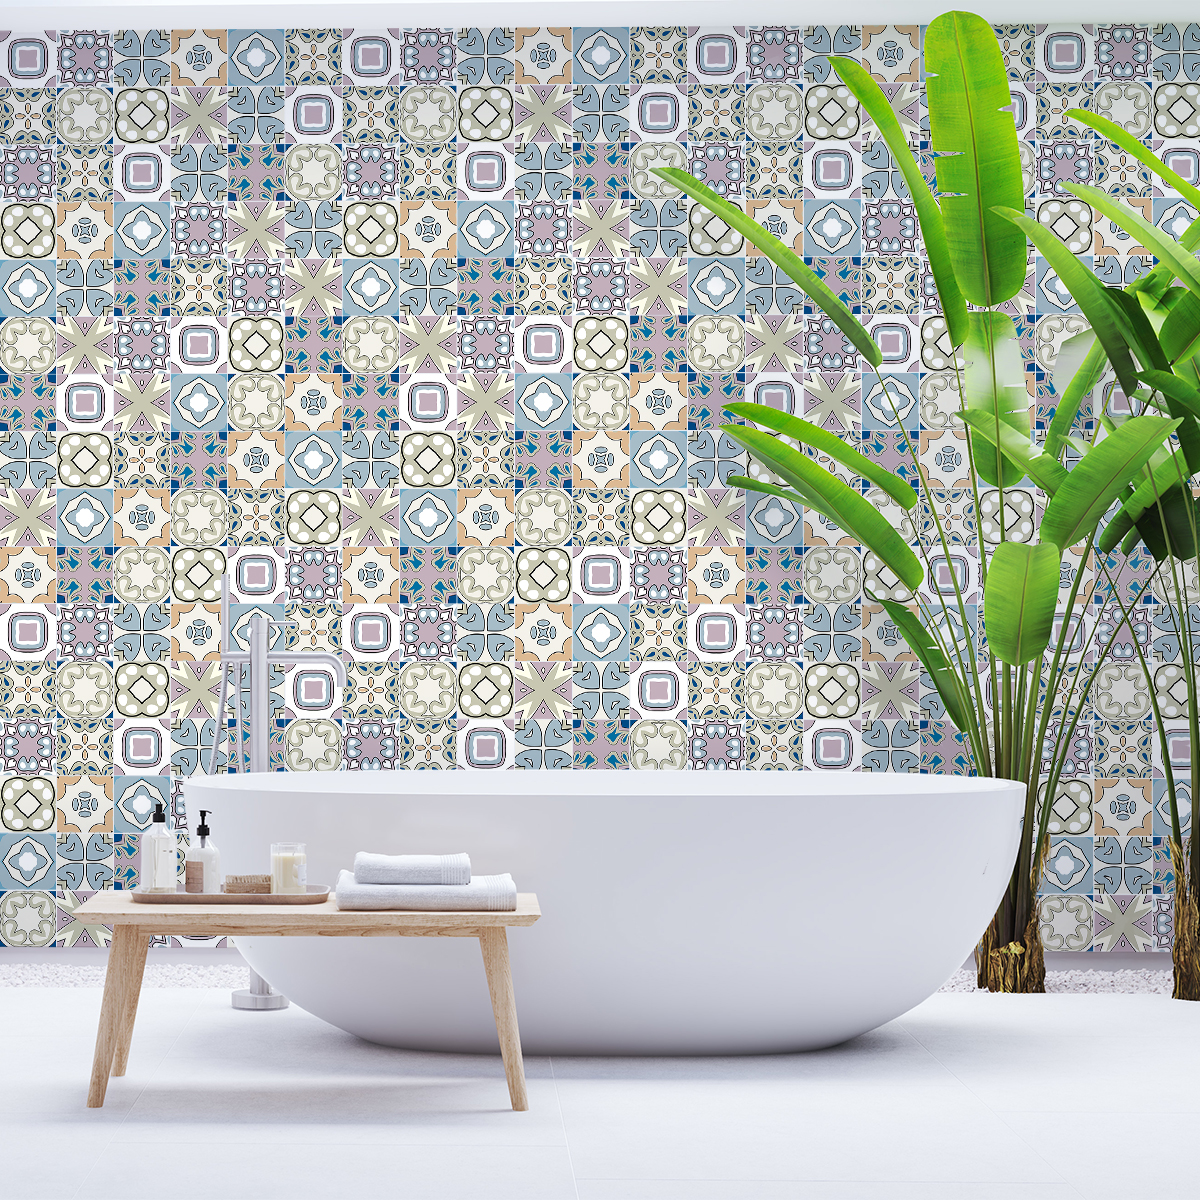 60 wall decal cement tiles azulejos dona